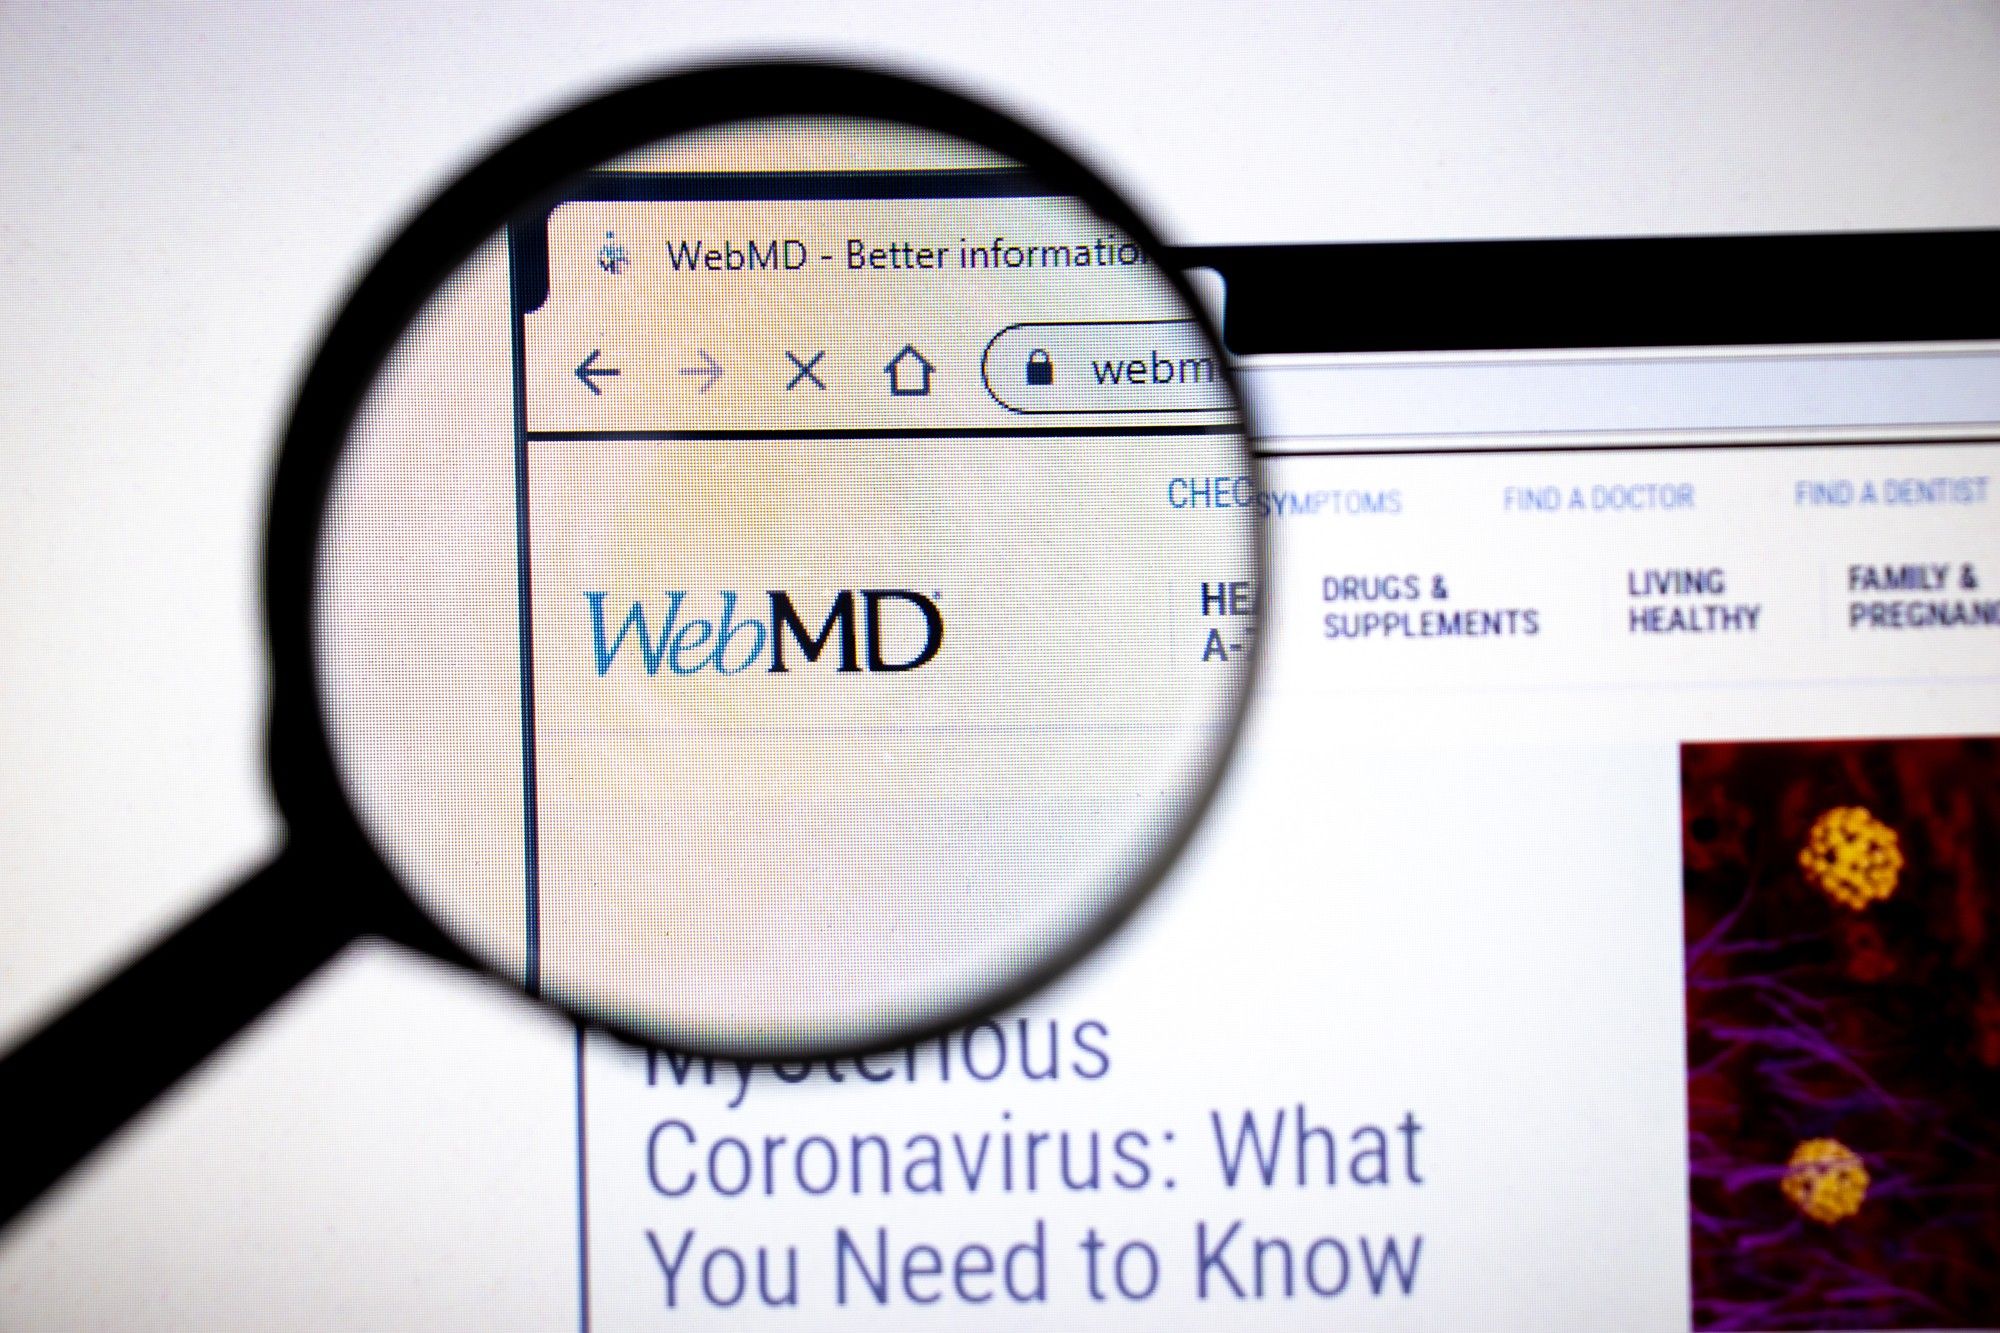 A class action lawsuit alleges the WebMD records visitors to their website.